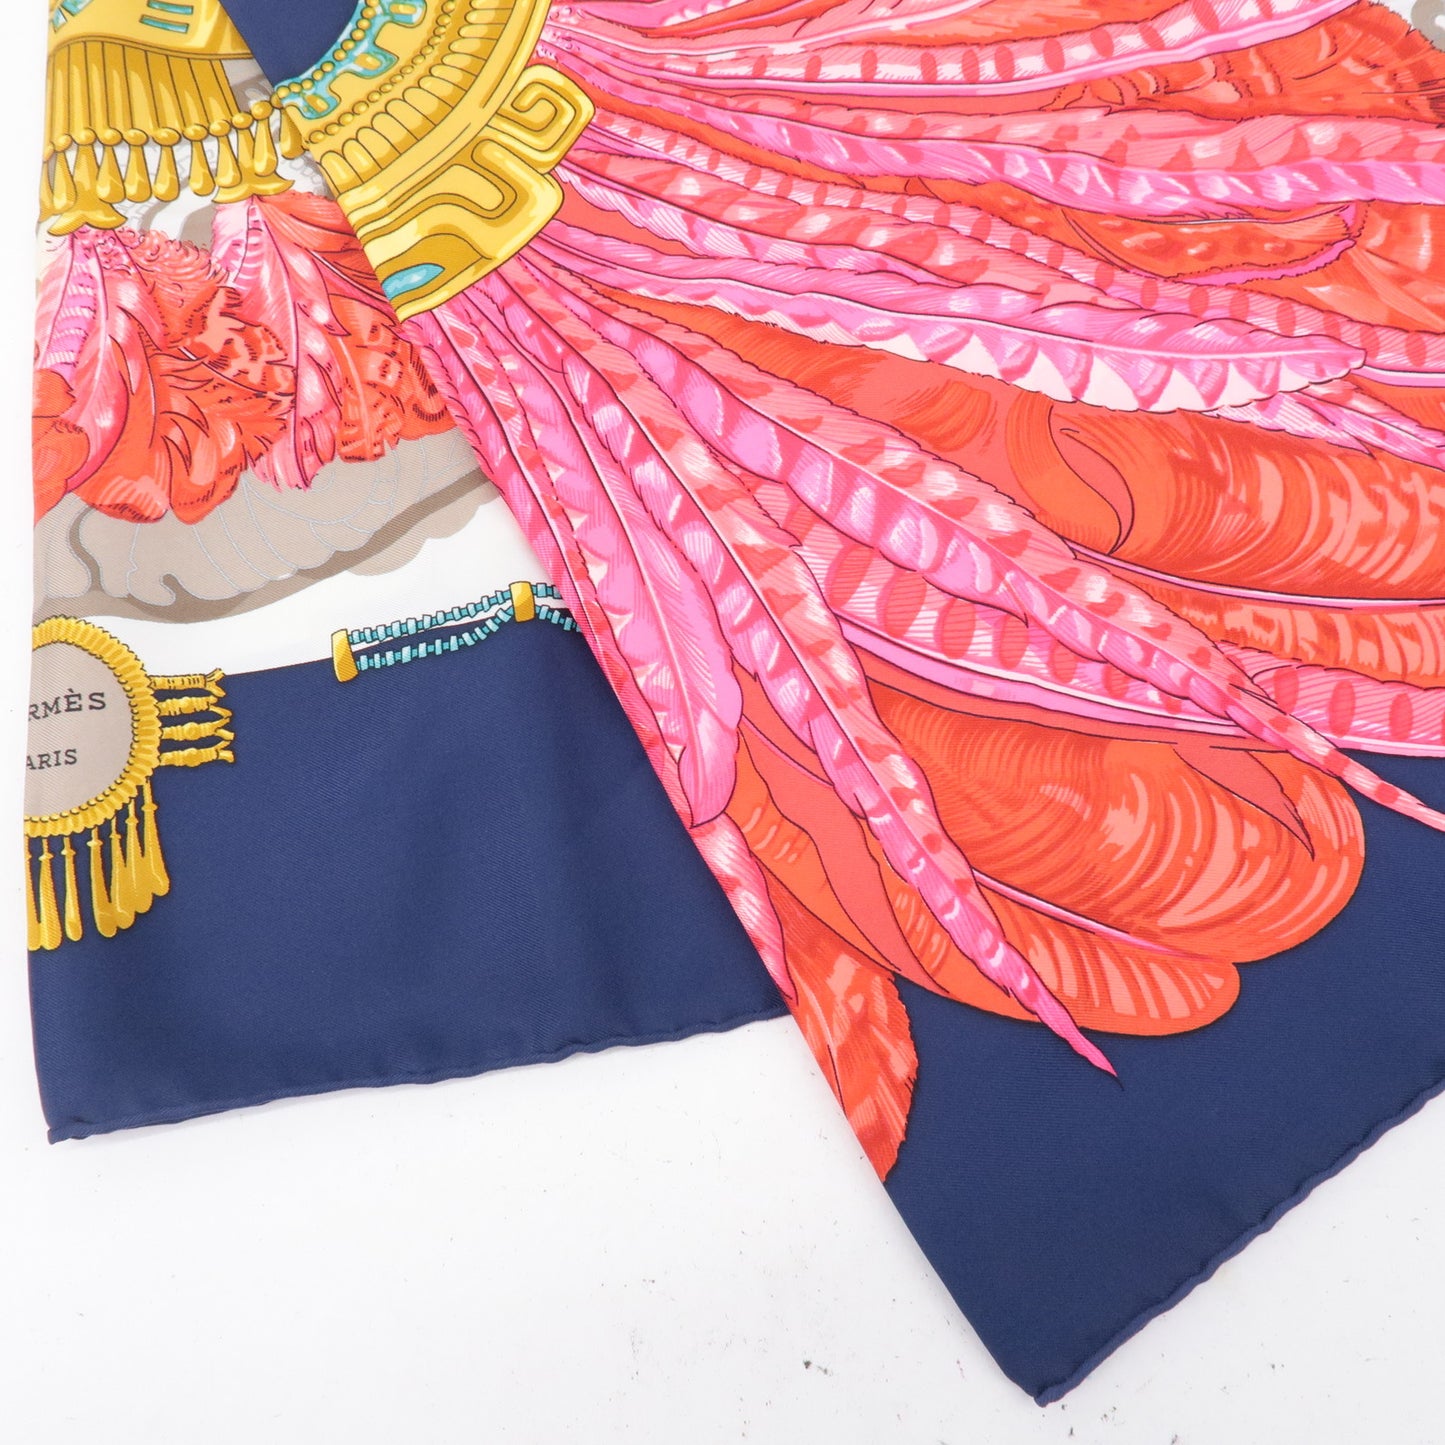 HERMES Carre 90 100% Silk Scarf Feather Jewelry Print Navy